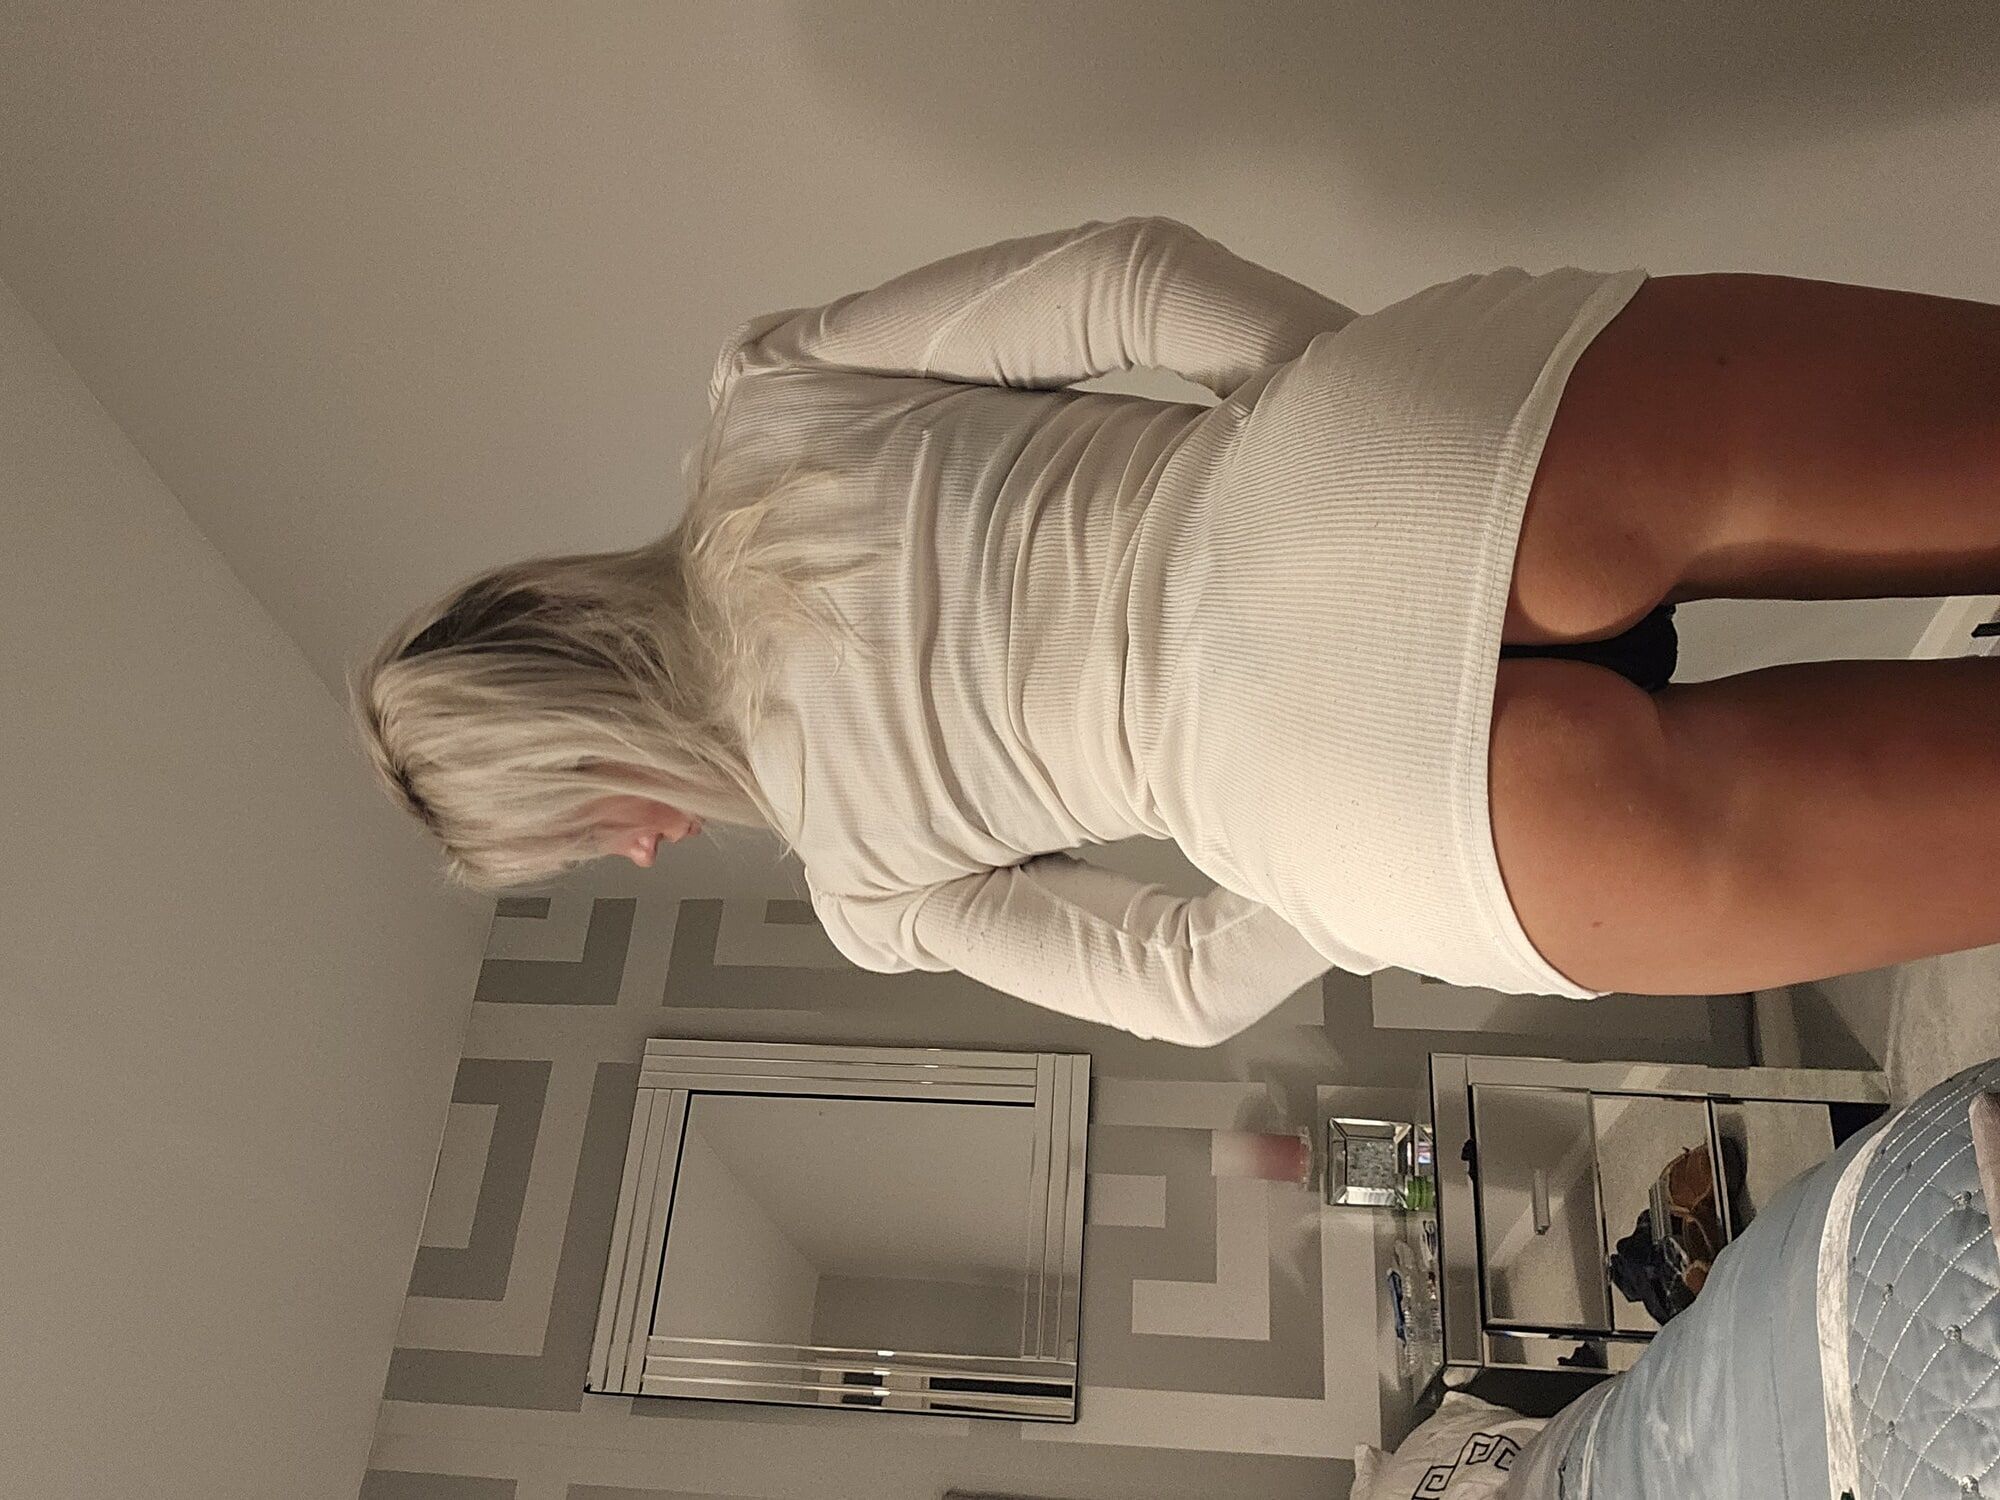 Wife's snapshots for hubby-showing off her sexy body #4